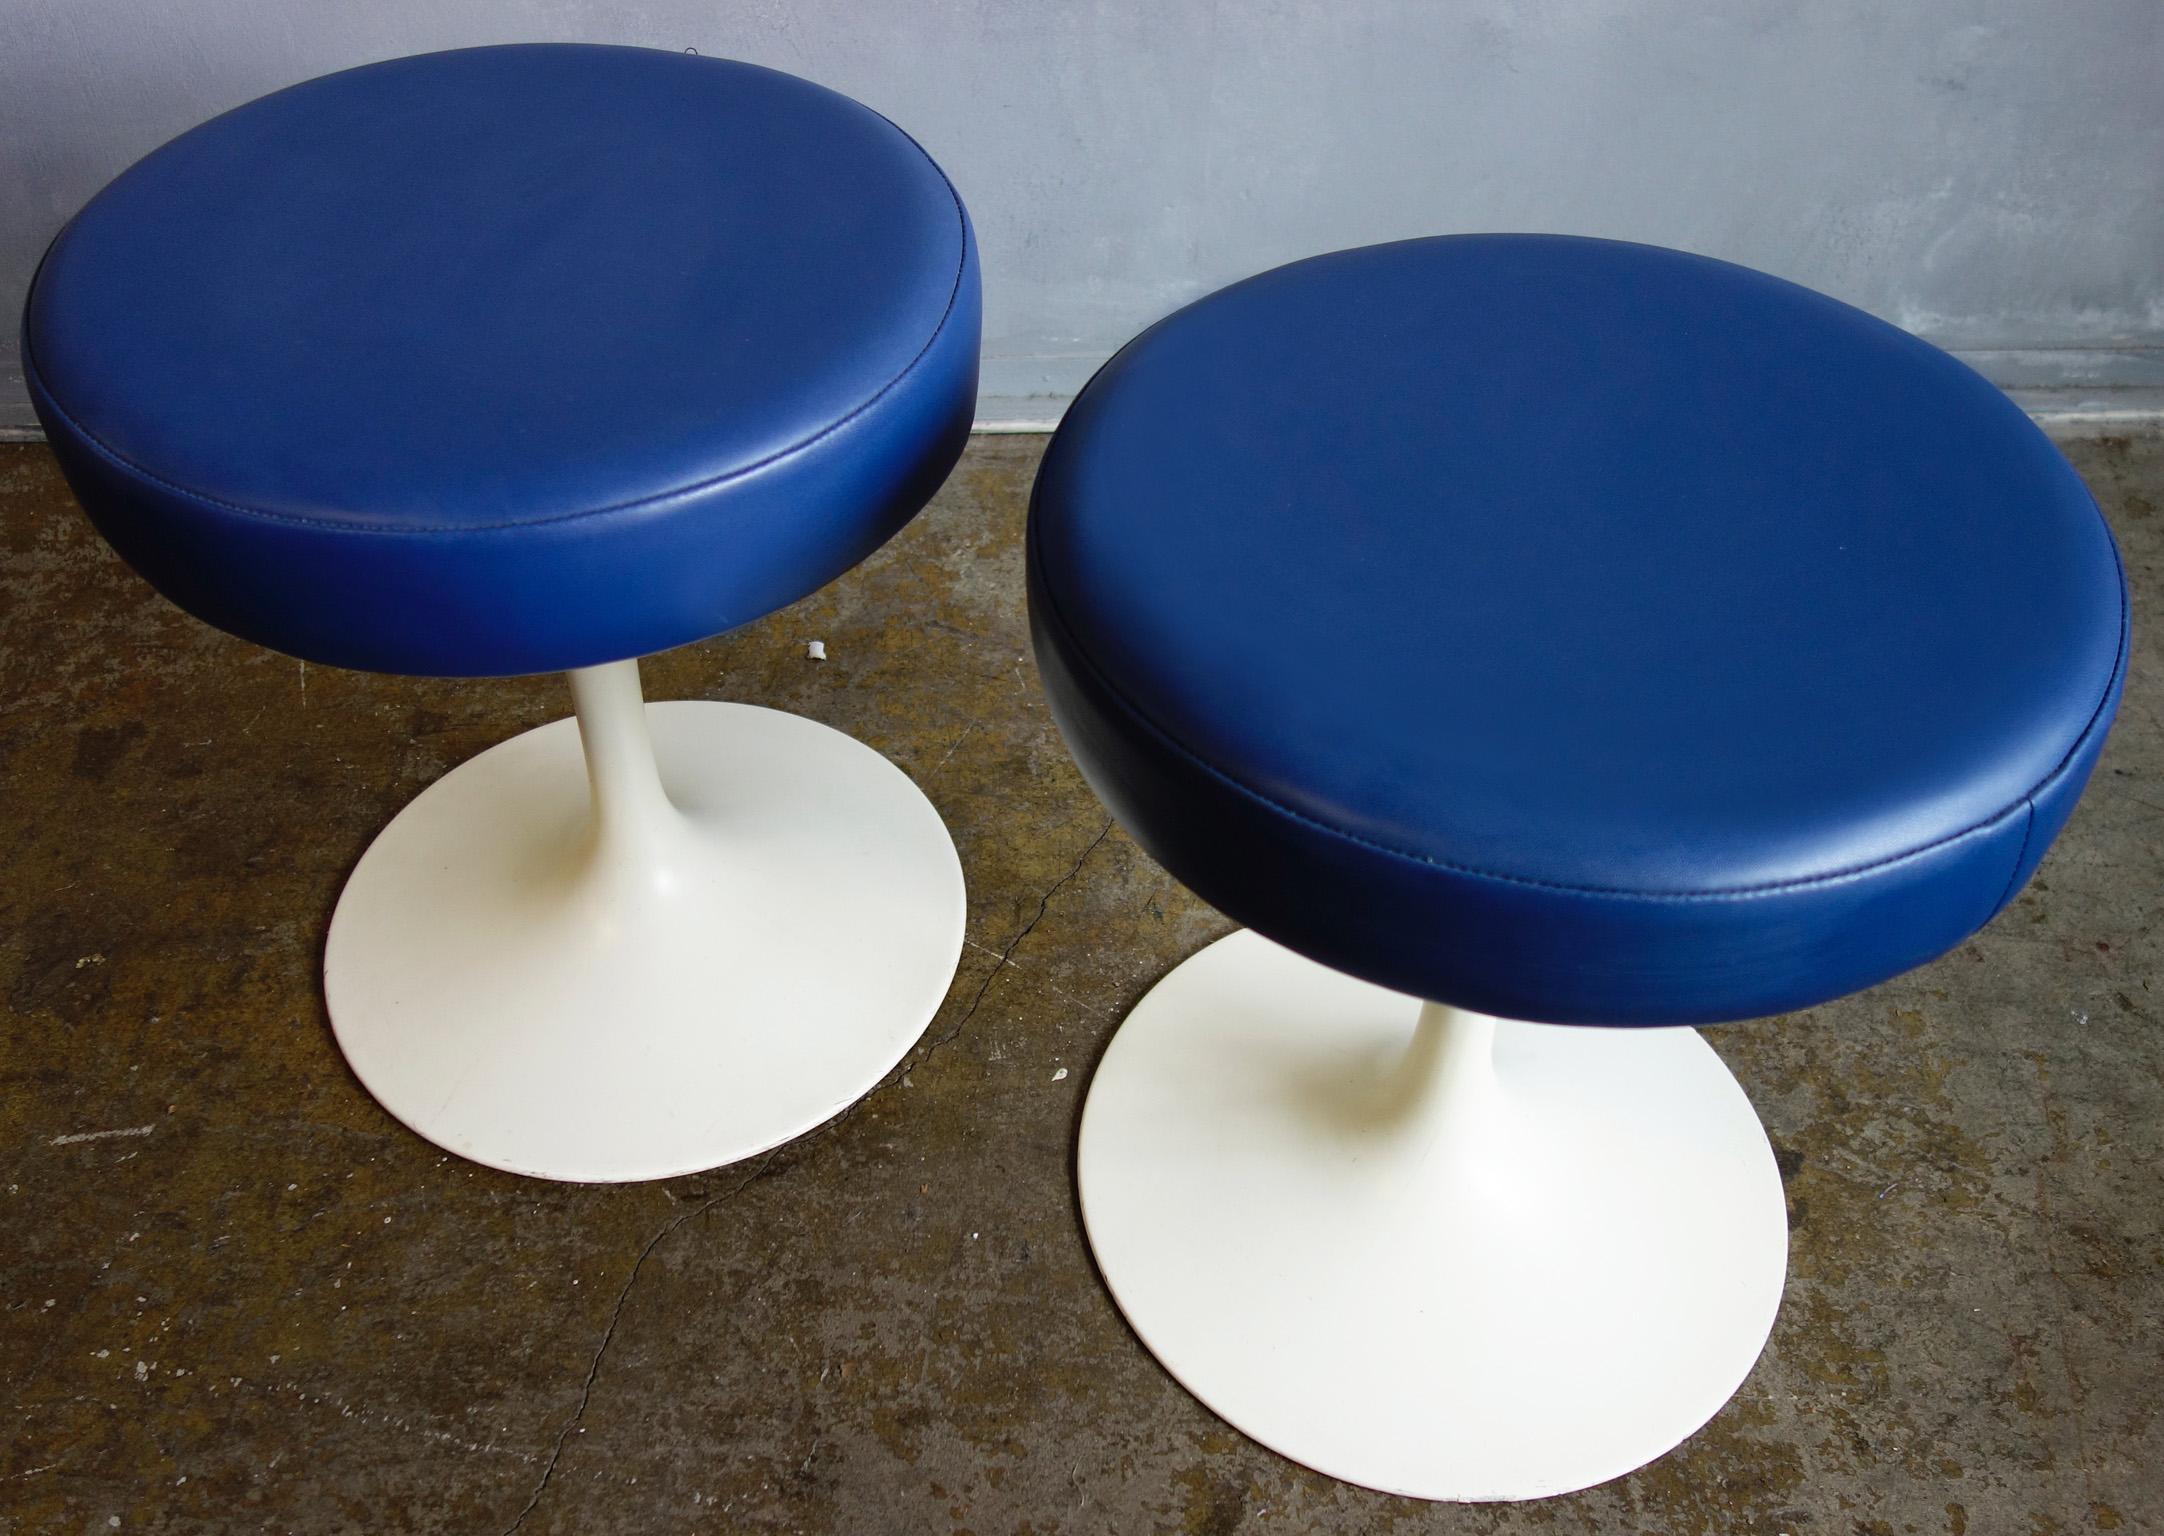 For your consideration are these midcentury tulip stools design by Saarinen. One of the most iconic design of the era-each stool is covered in blue upholstery and in good condition. Price per stool.